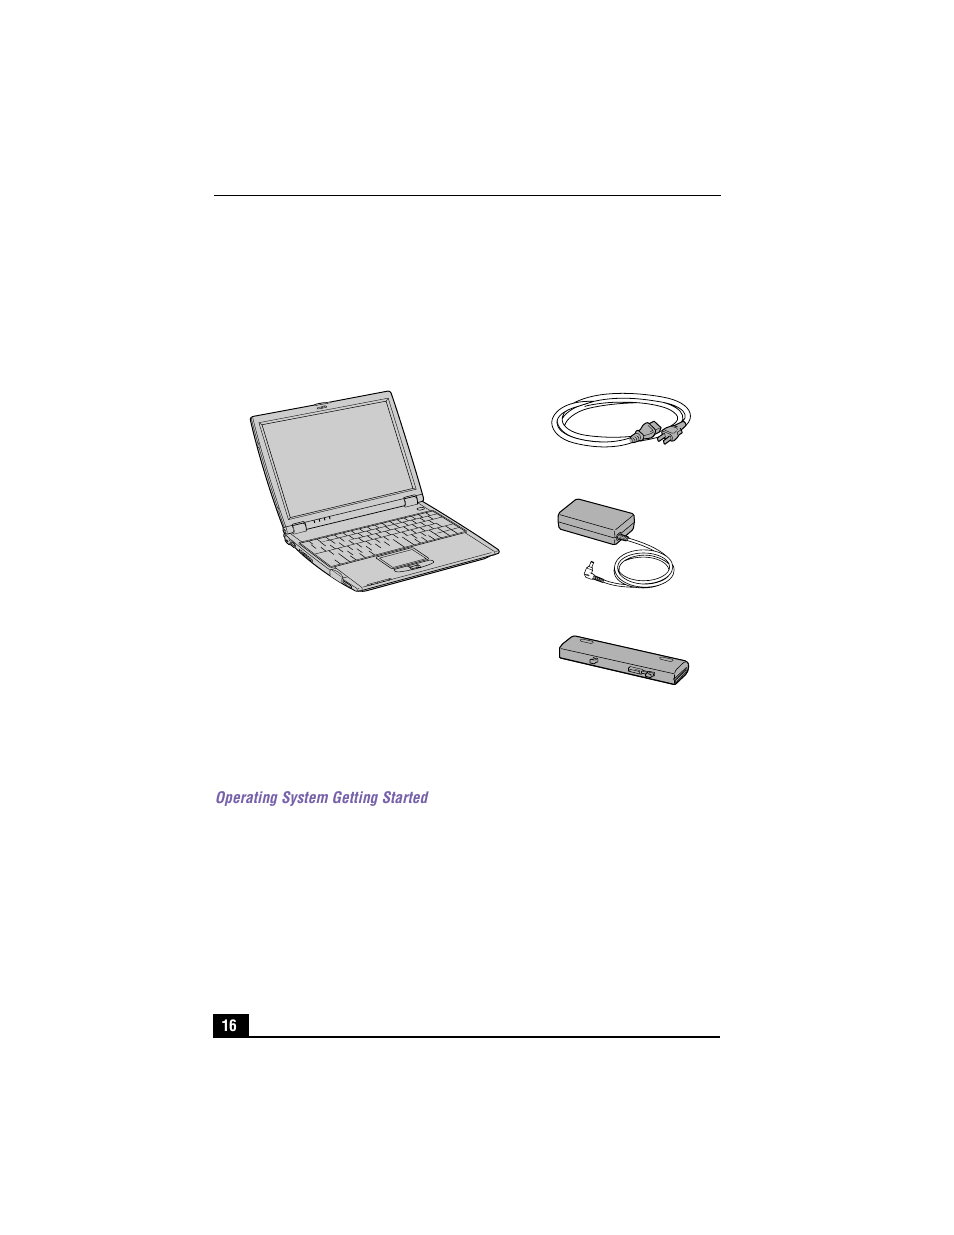 Unpacking your notebook, Hardware, Main unit | Power cord, Ac adapter, Manuals, Vaio® quick start, Operating system getting started, Software cds, Microsoft® word 2000 | Sony PCG-R505TEK User Manual | Page 16 / 150